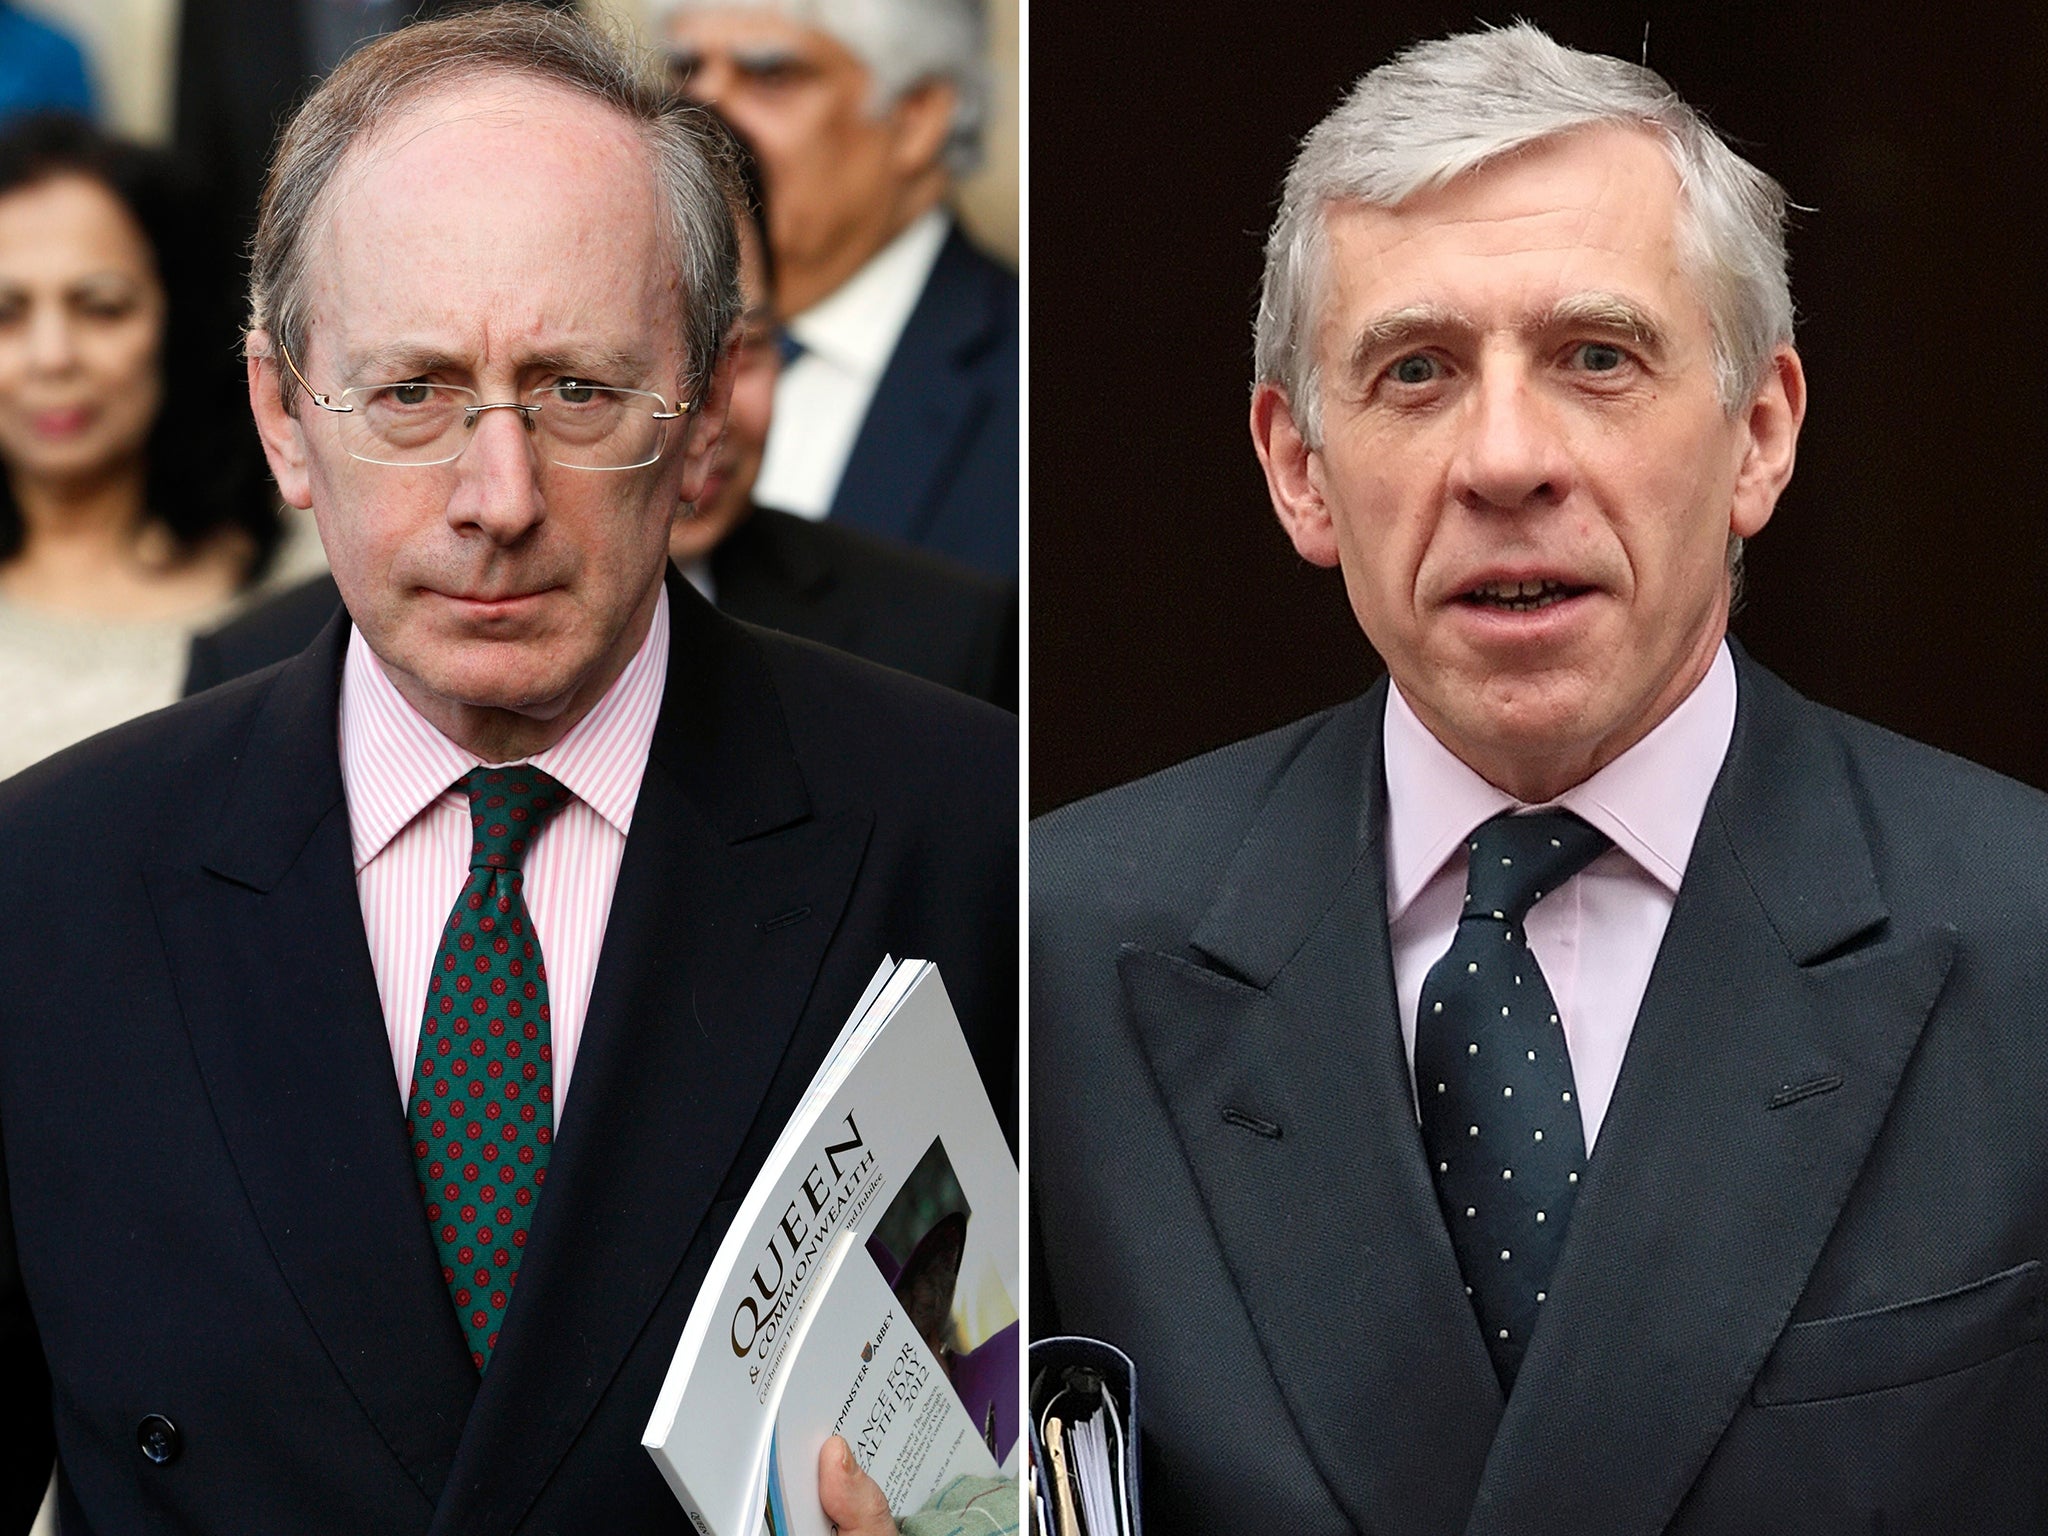 Both Sir Malcolm Rifkind and Jack Straw have been suspended by their parties in Westminster